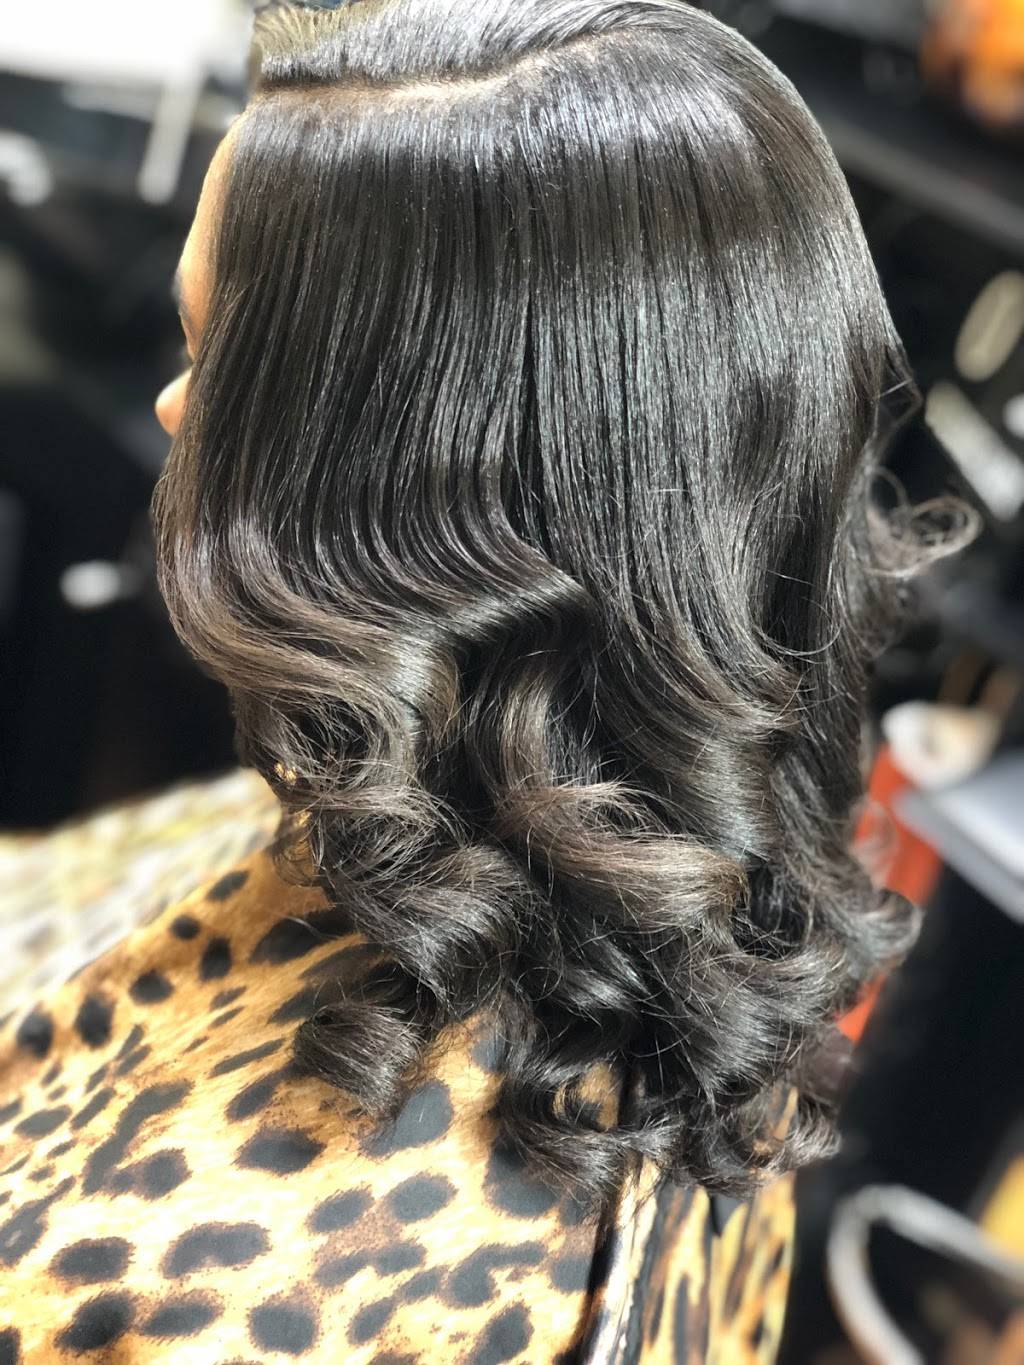 The One Beauty Salon | 8560 Hwy 6 N Suite 105, Houston, TX 77095 | Phone: (601) 527-6034